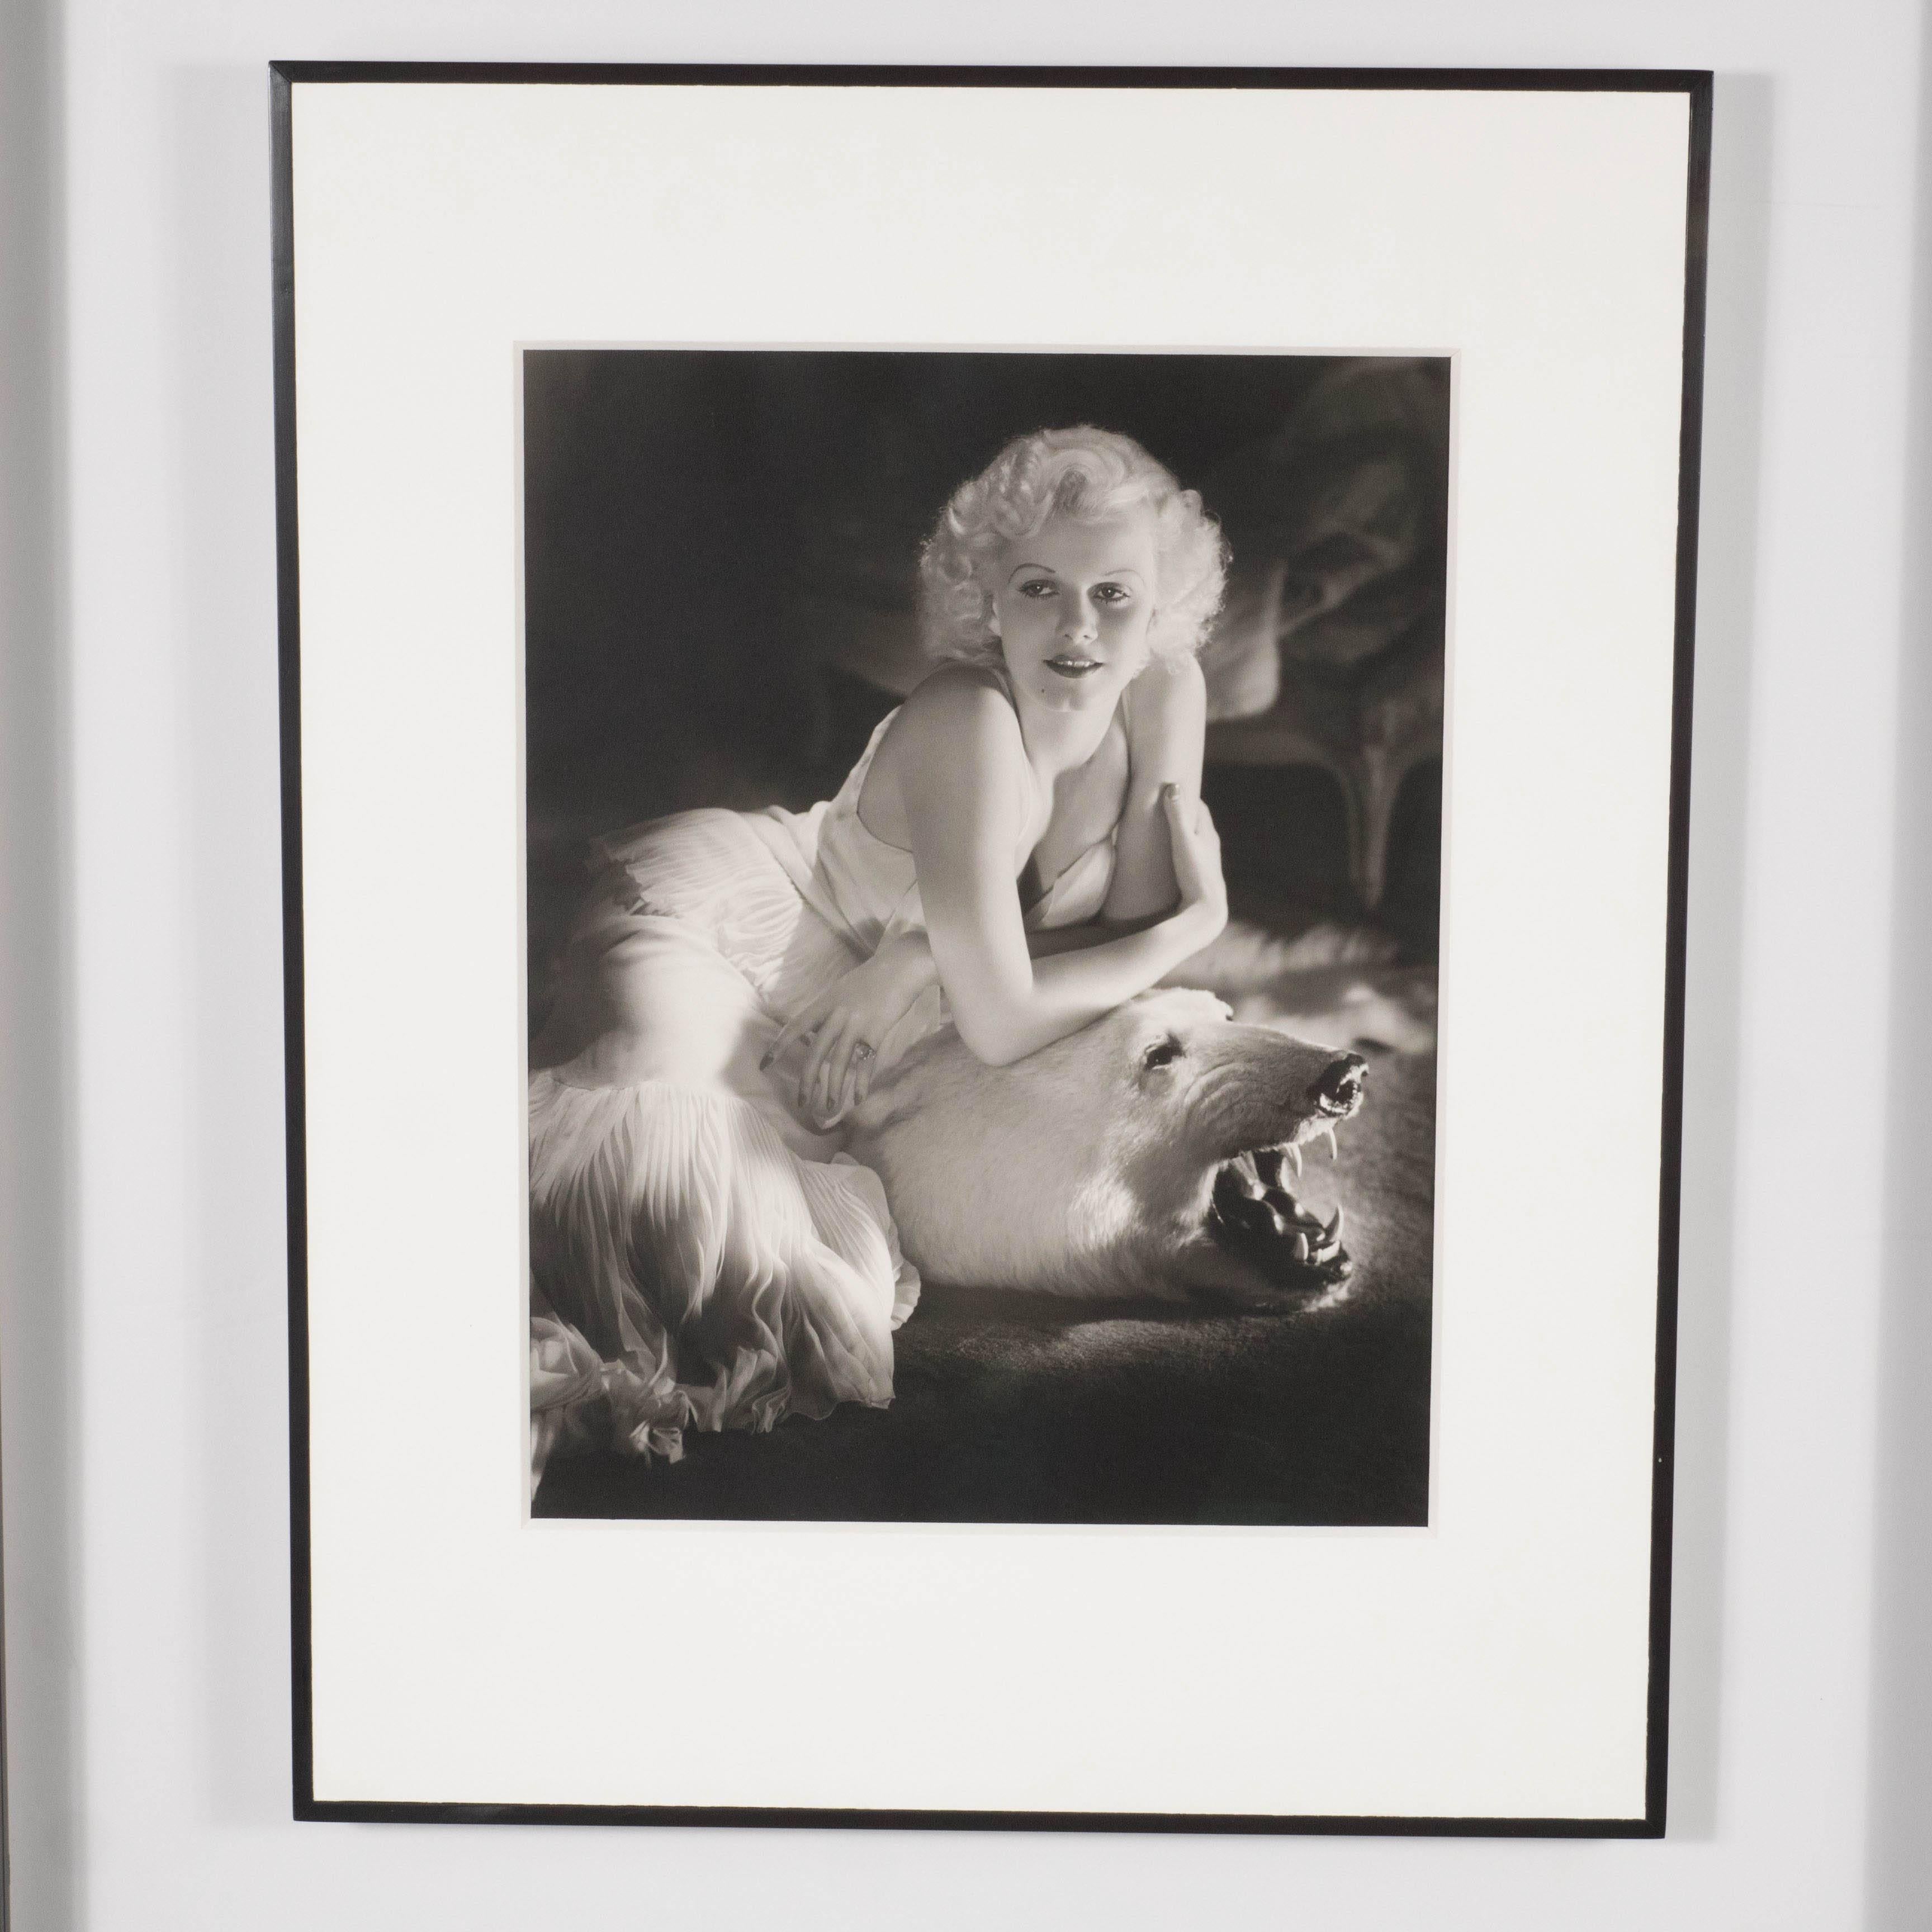 An original gelatin silver print (Edition of 190) made from the original negative by George Hurrell.

This piece was hand-developed, dodged and burned by or under the personal direction of George Hurrell. This edition was published at the